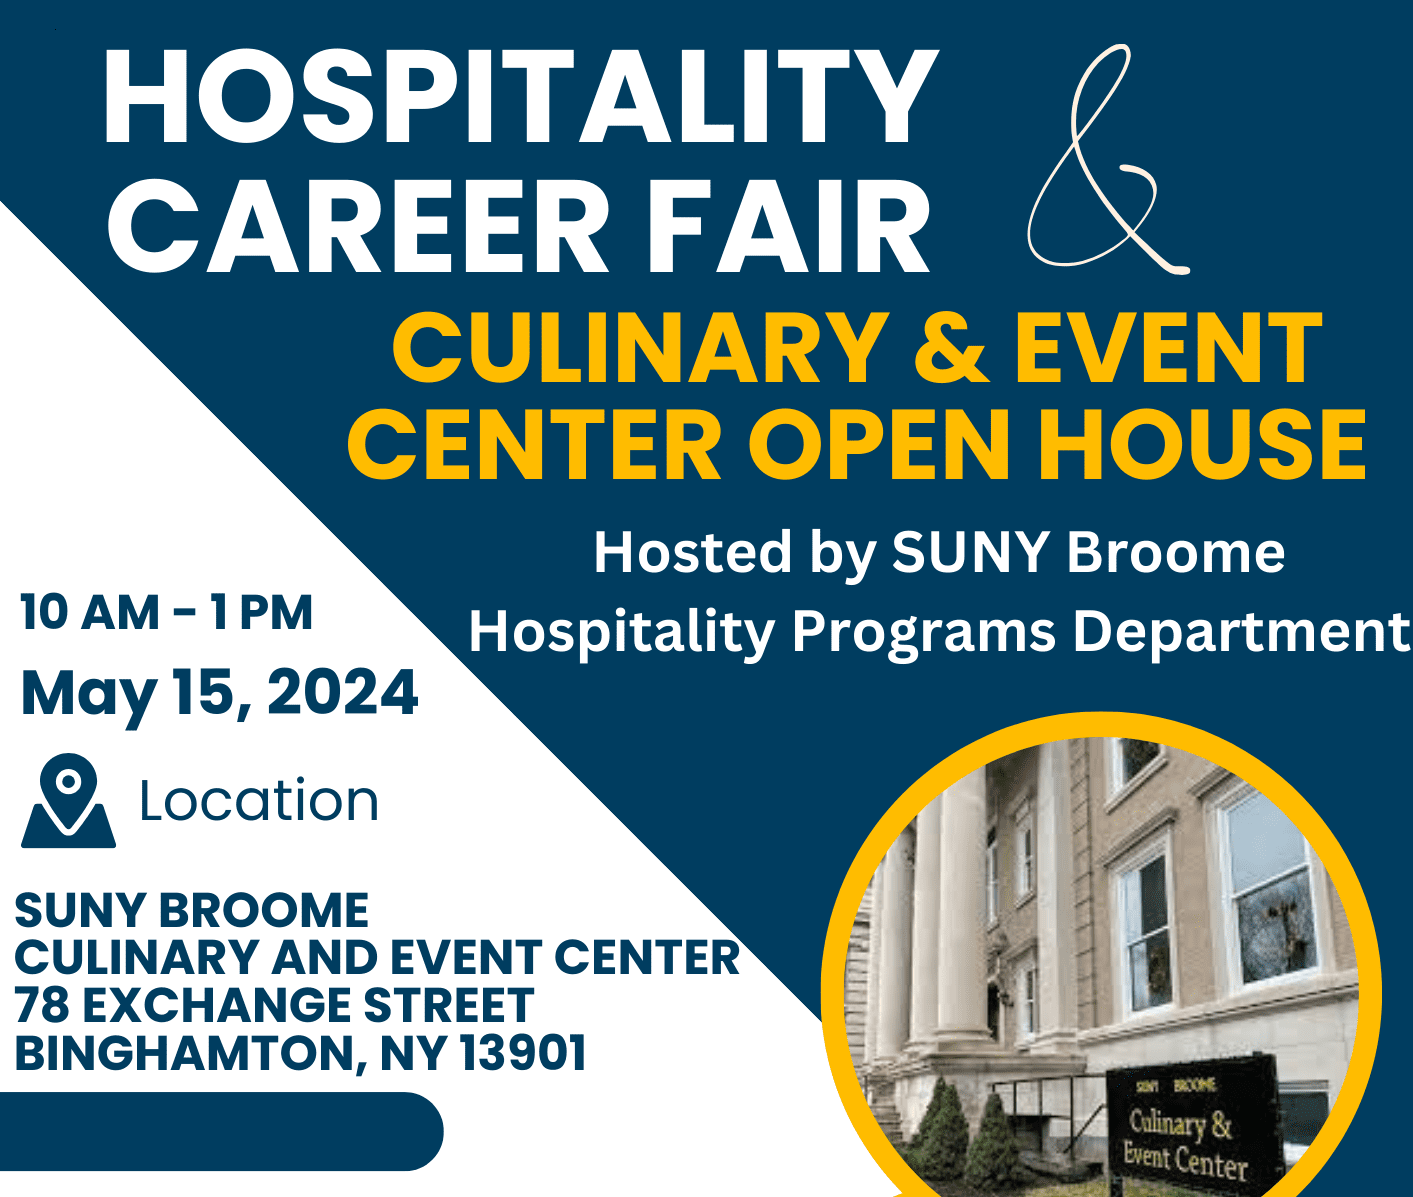 Hospitality Career Fair & CEC Open House May 15, 2024 at 10 am to 1 pm at SUNY Broome Culinary and Event Center in Binghamton